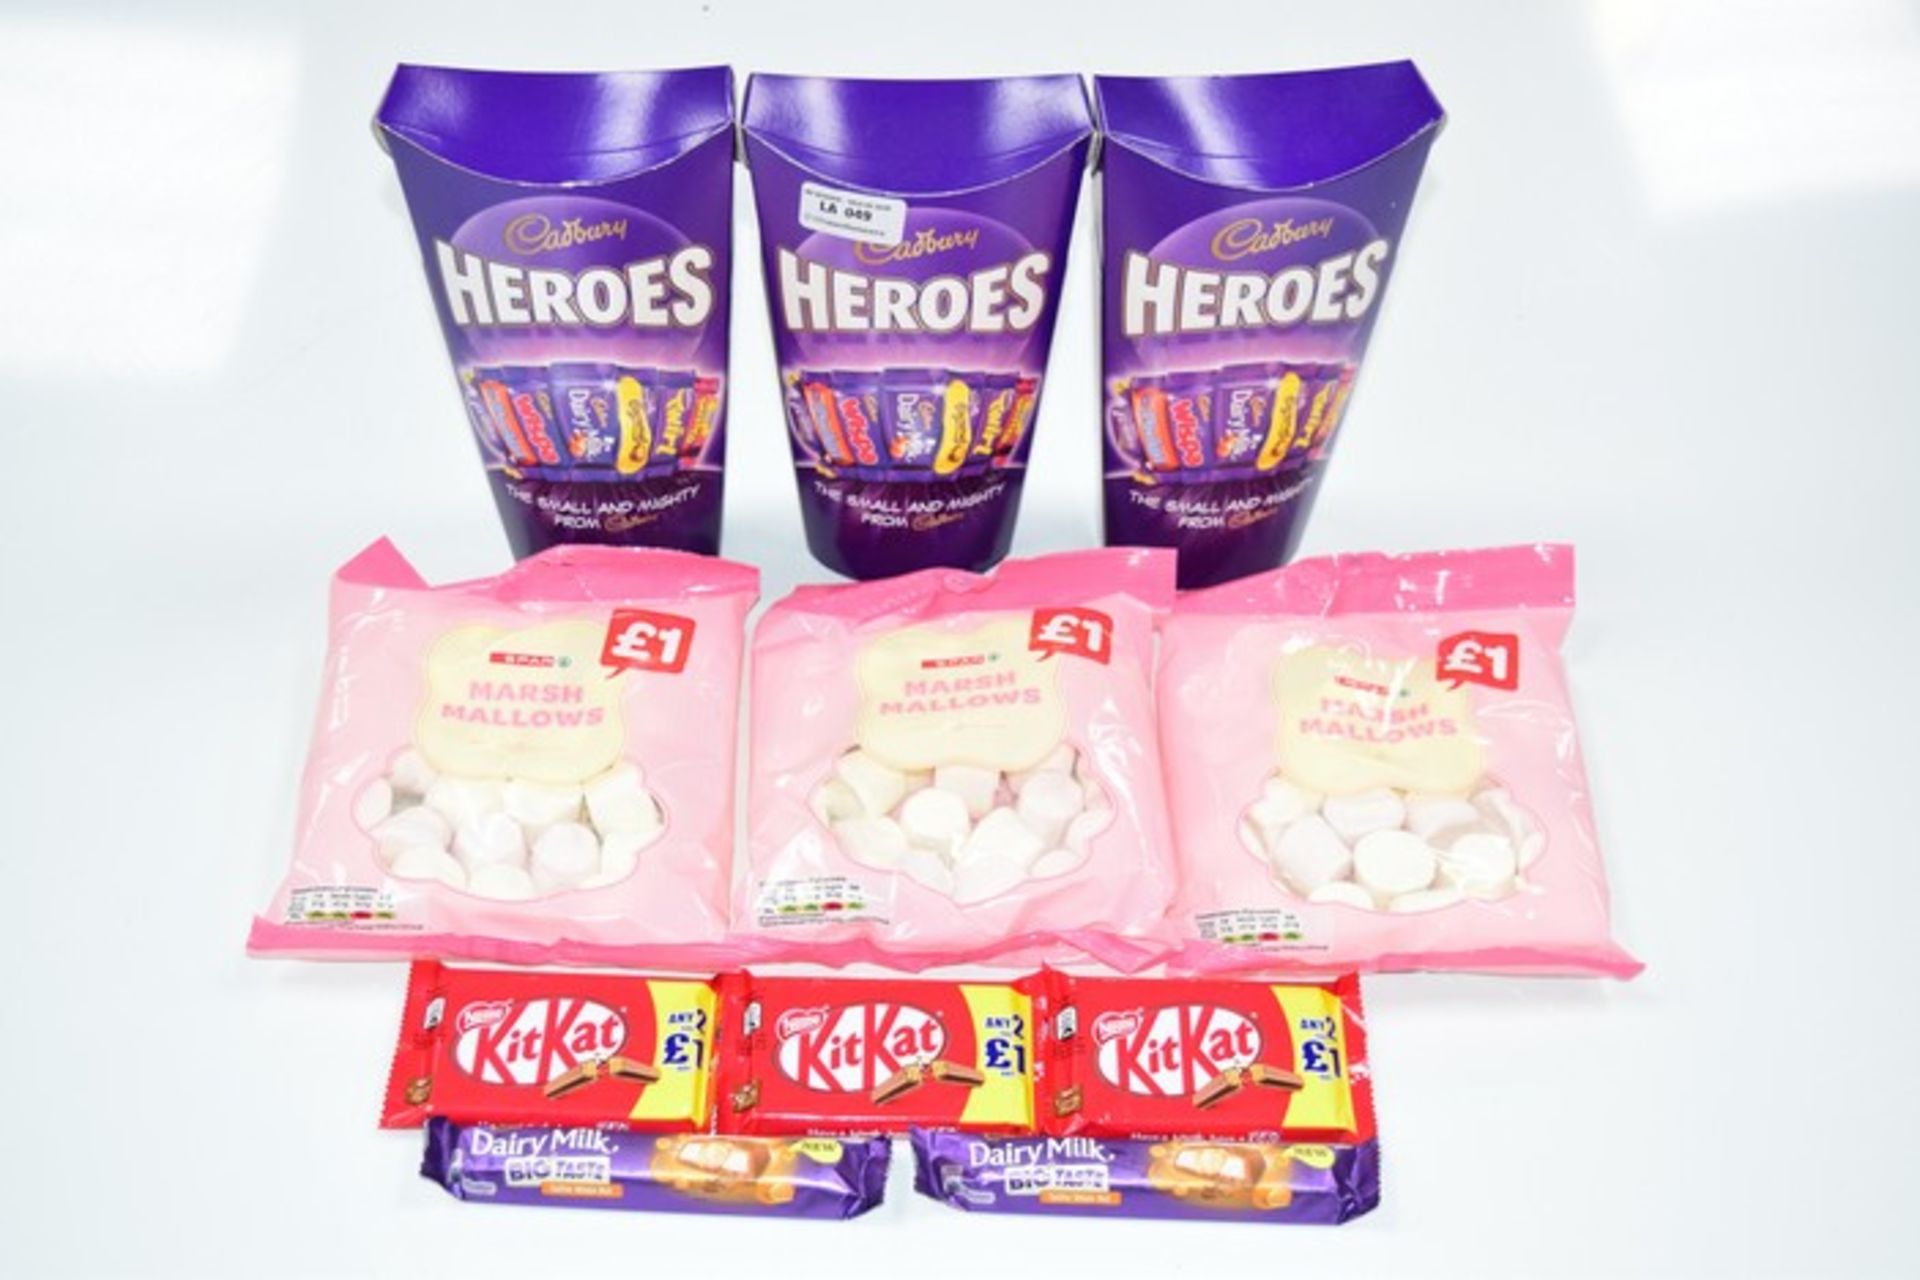 6 x BOXES OF HEROES CHOCOLATES COMBINED RRP £18 (SOLD PER ITEM) *PLEASE NOTE THAT THE BID PRICE IS